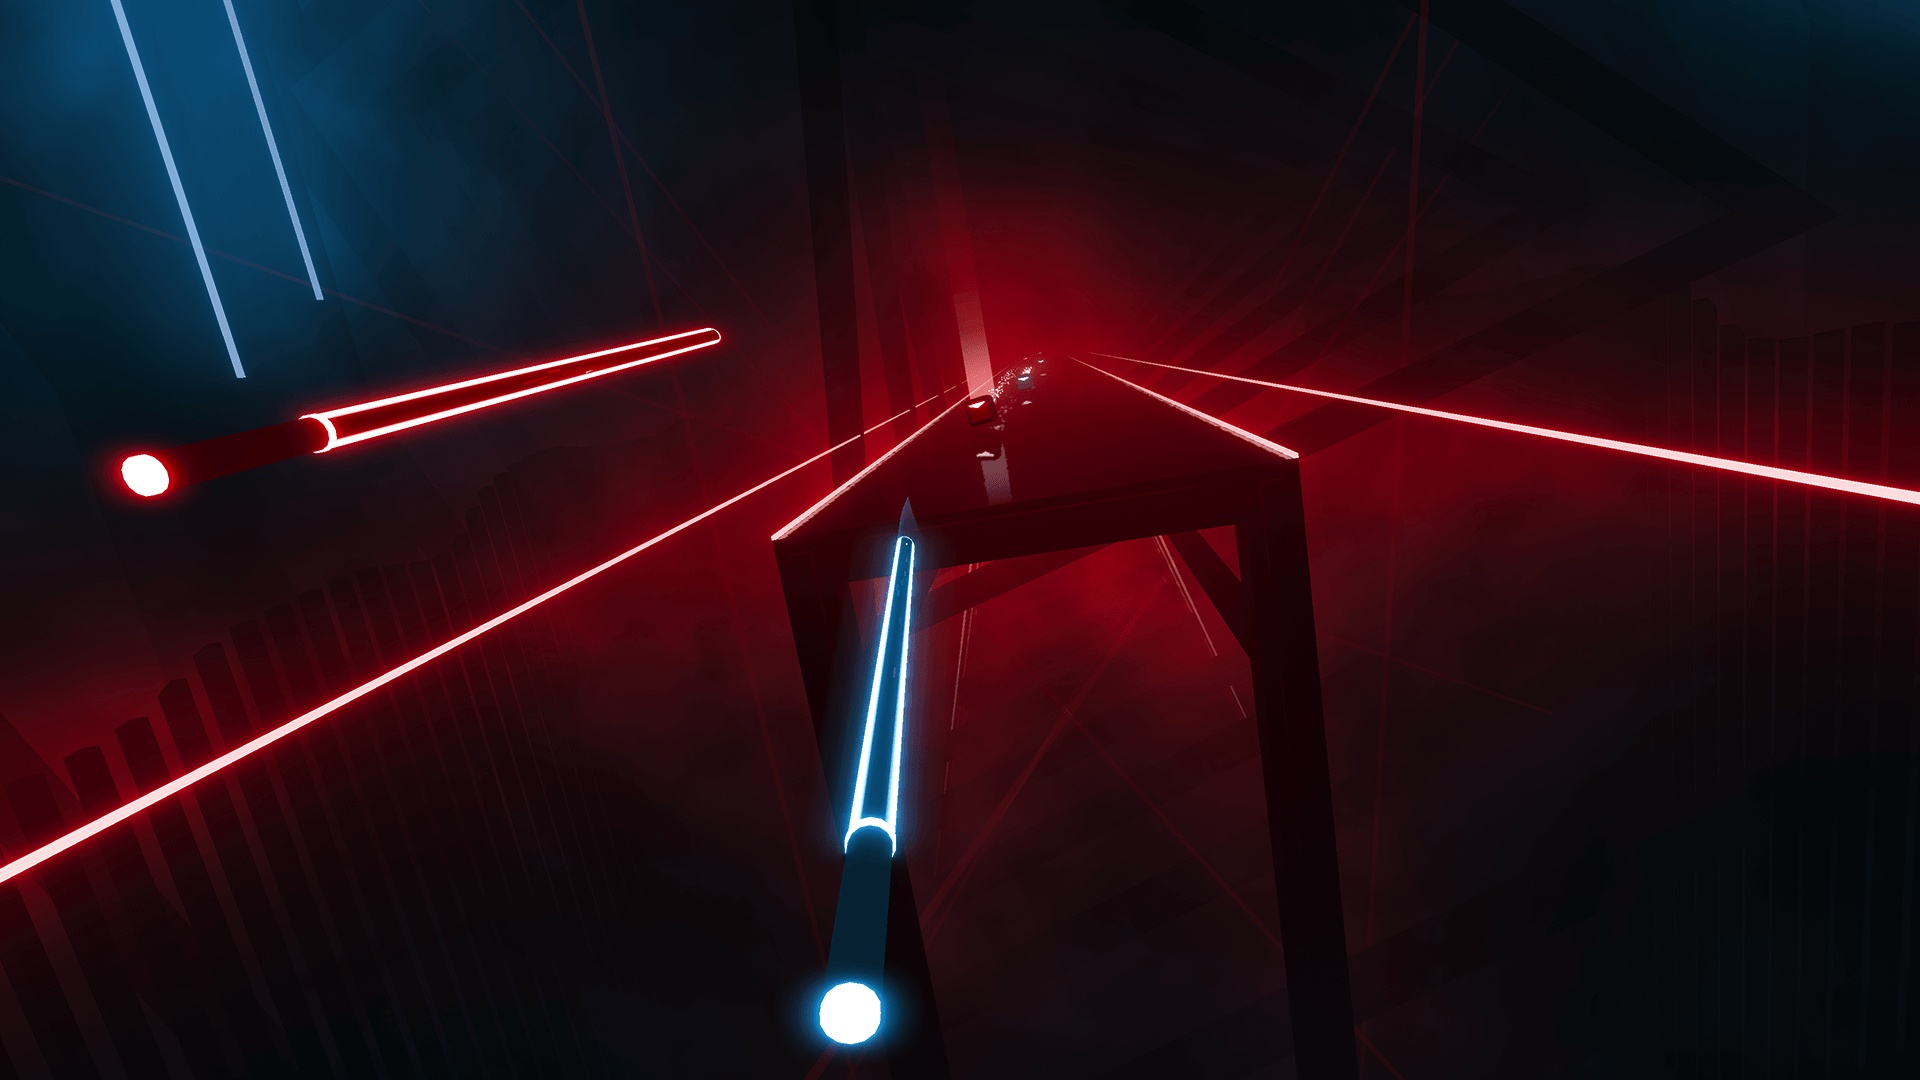 Beat Games, Beat Saber, Beat Saber Review, Family, Great Soundtrack, Hyperbolic Magnetism, indie, Music, party, Rating 8/10, Rhythm, VR